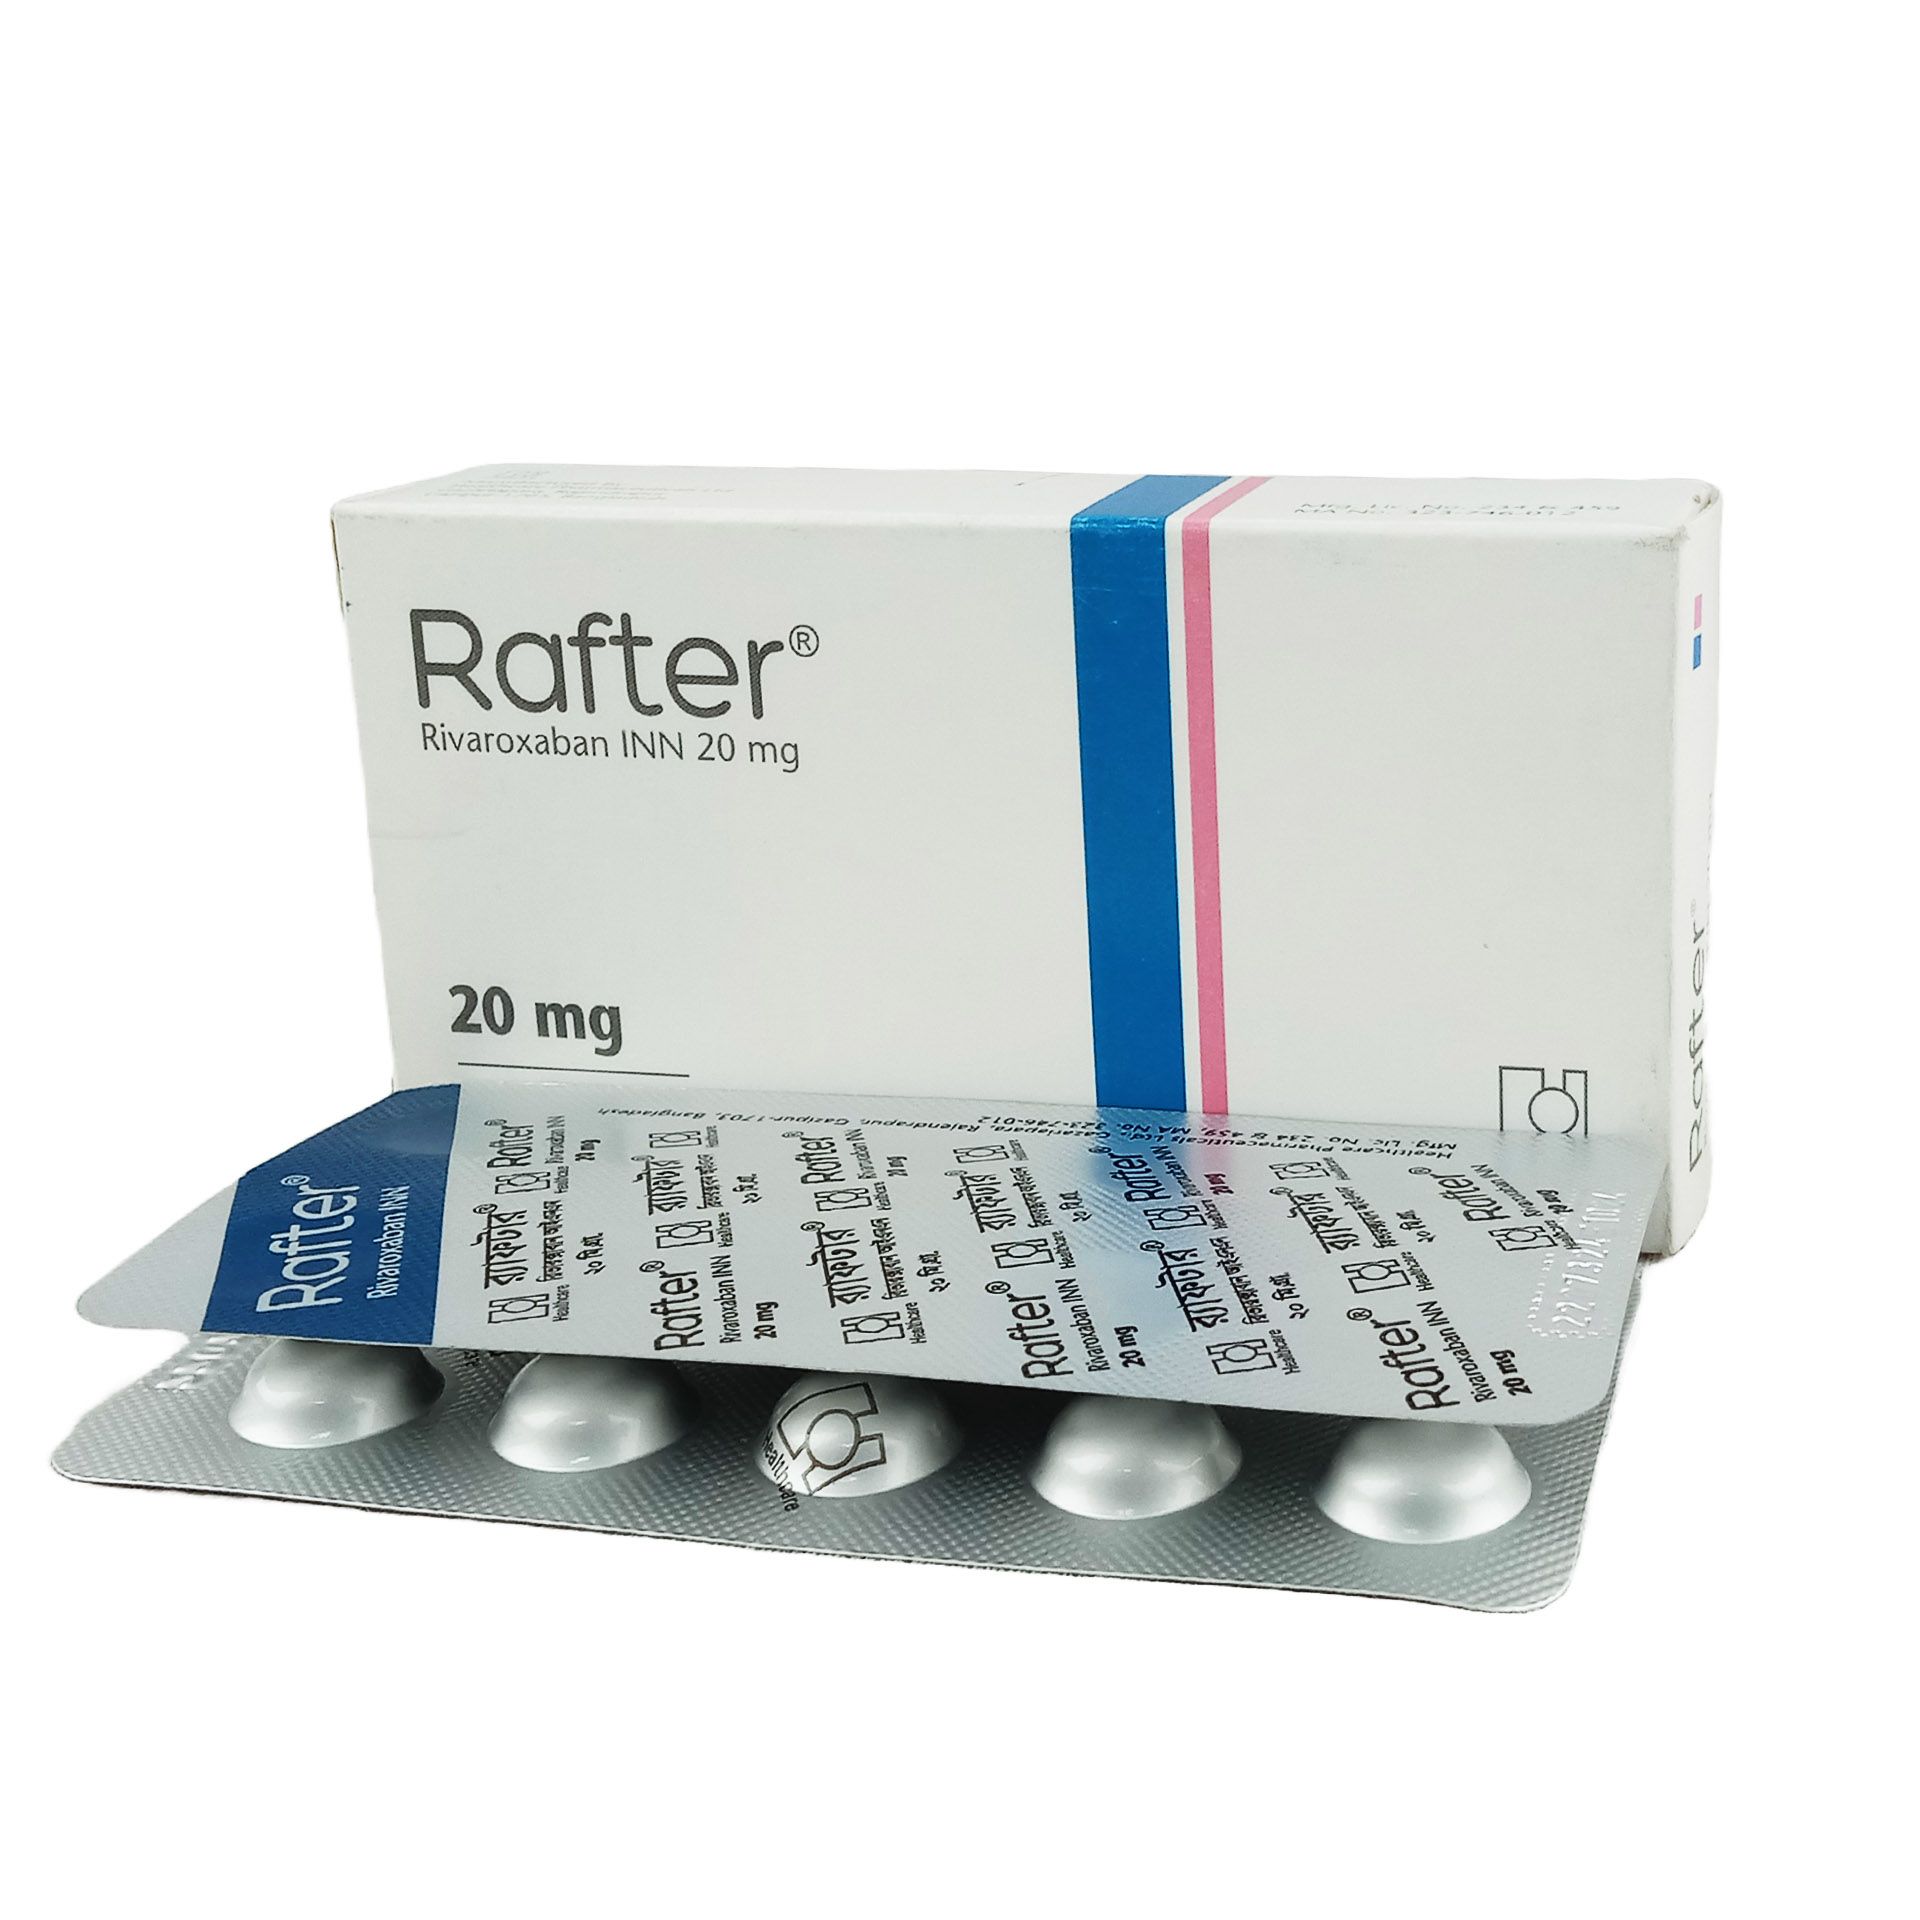 Rafter 20mg Tablet